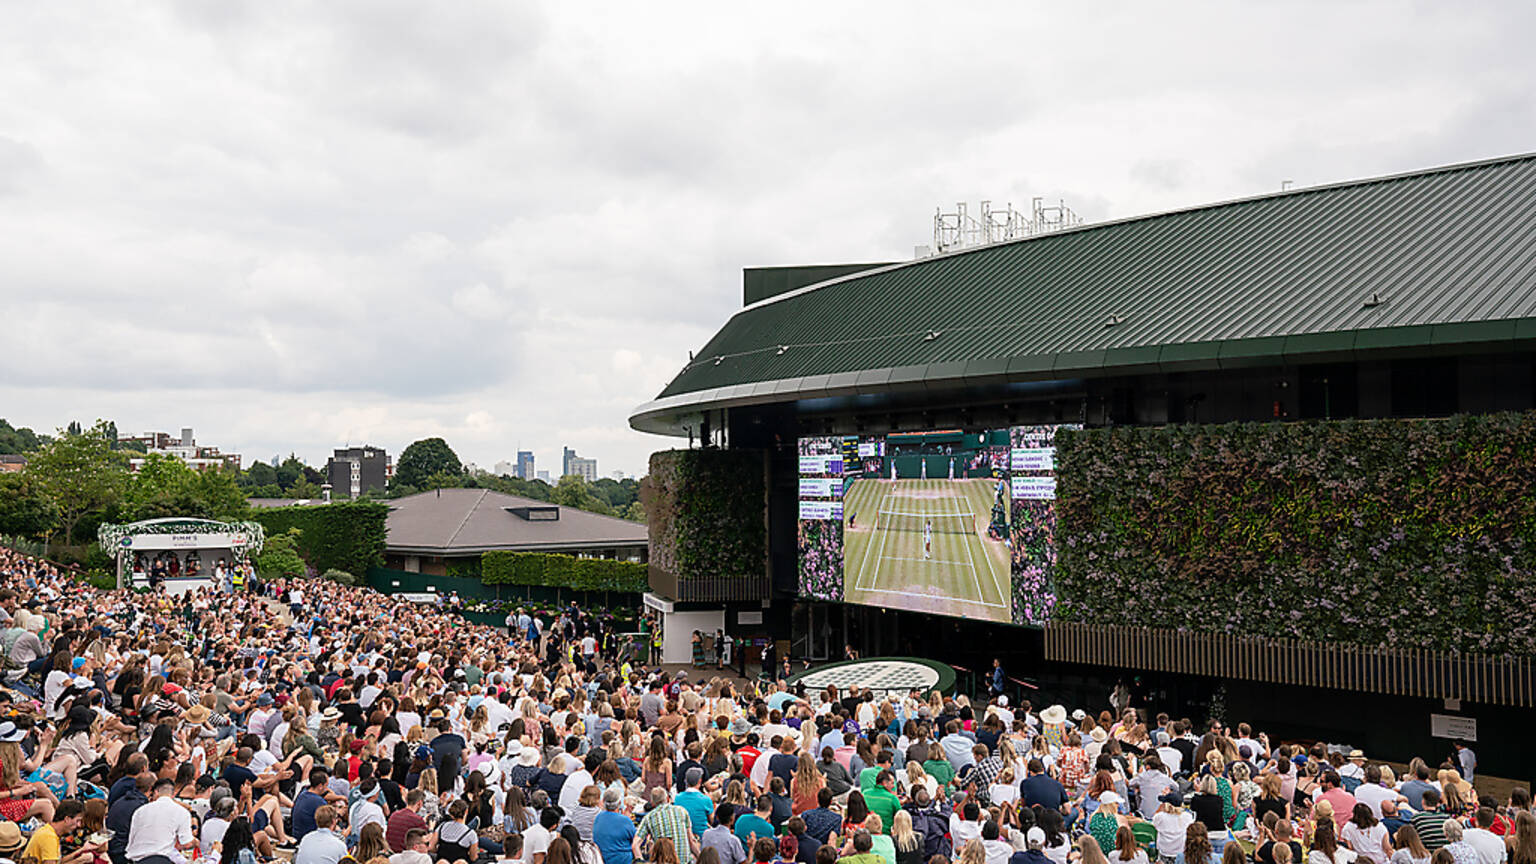 The iconic Wimbledon Hill is coming to New York this summer